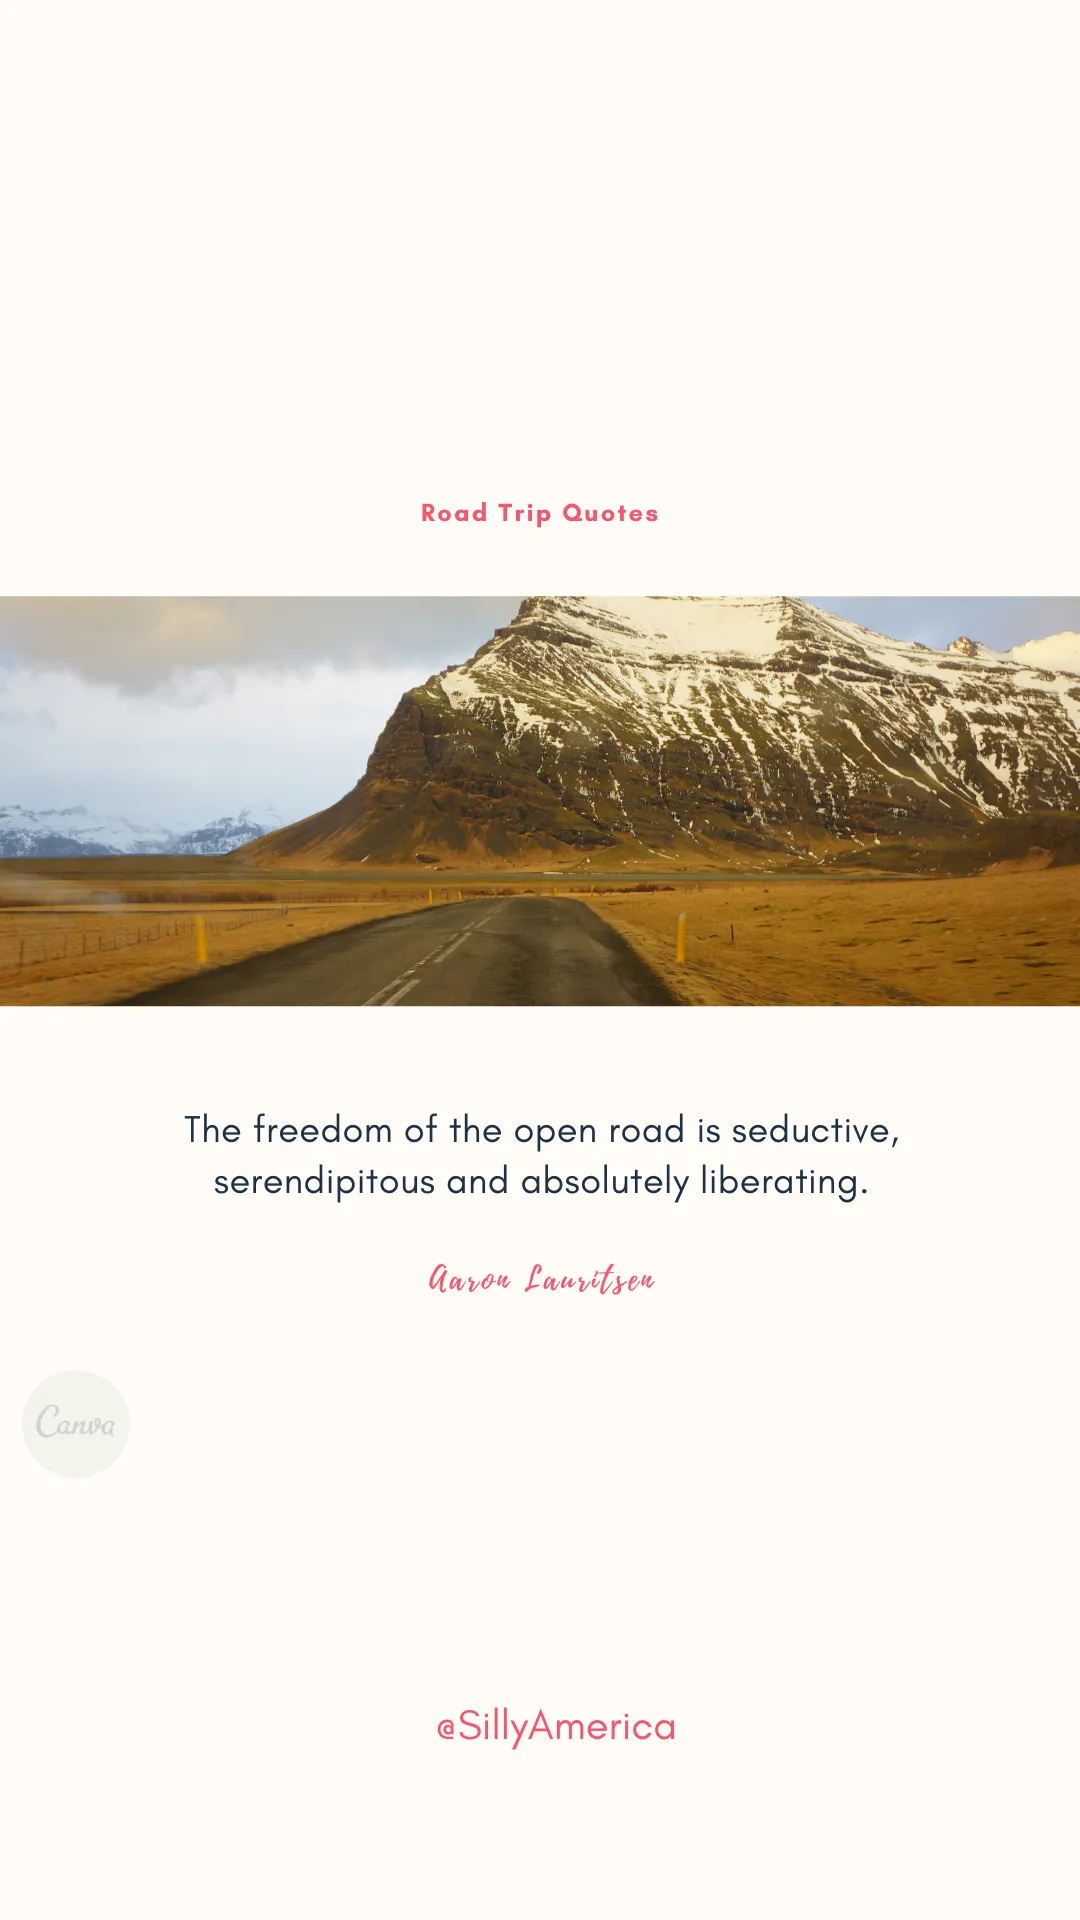 “The freedom of the open road is seductive, serendipitous and absolutely liberating.” Aaron Lauritsen, 100 Days Drive: The Great North American Road Trip